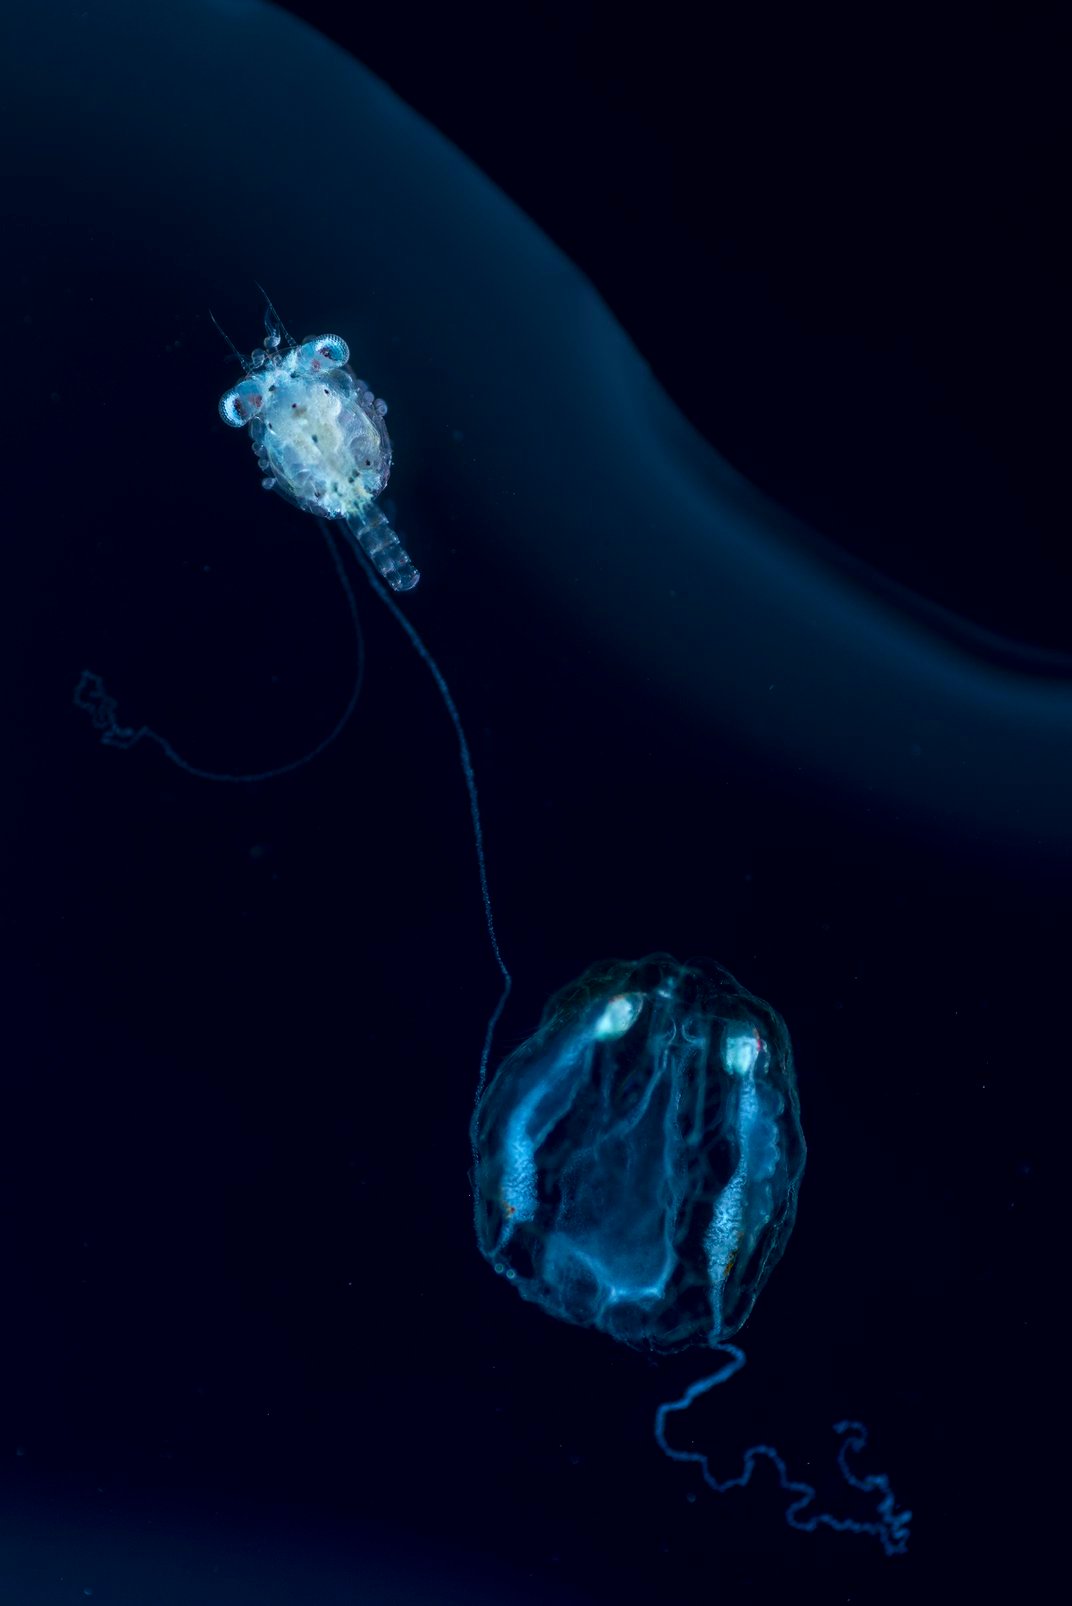 Tentaculated comb jelly